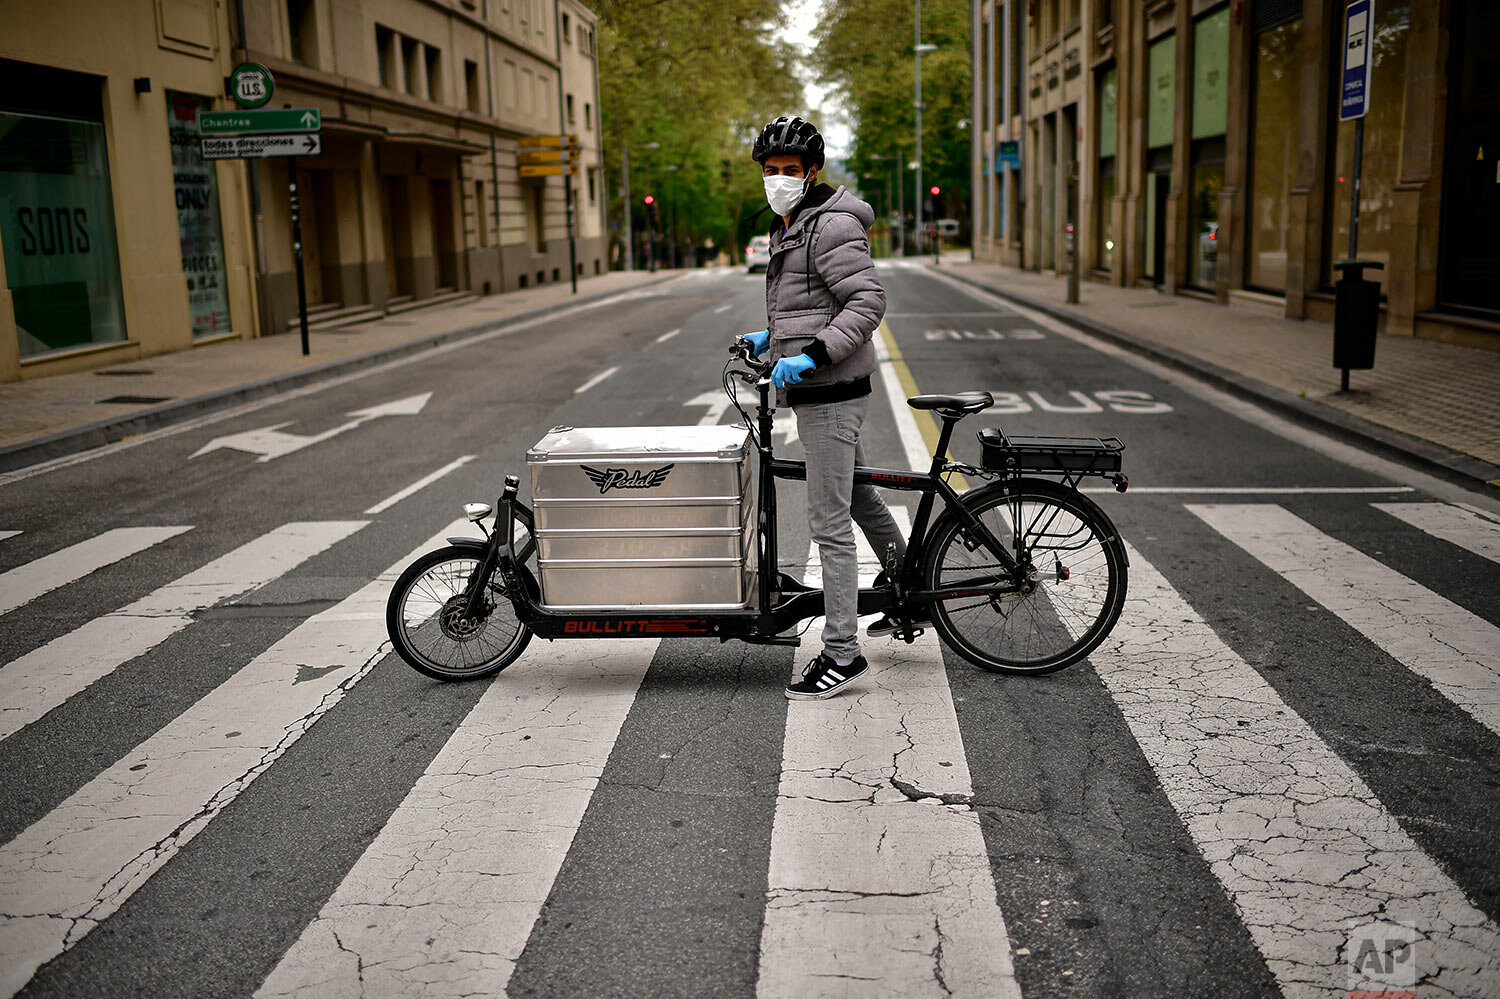  Sidi Hasan poses for a photograph with his delivery bicycle in Pamplona, northern Spain. (AP Photo/Alvaro Barrientos) 